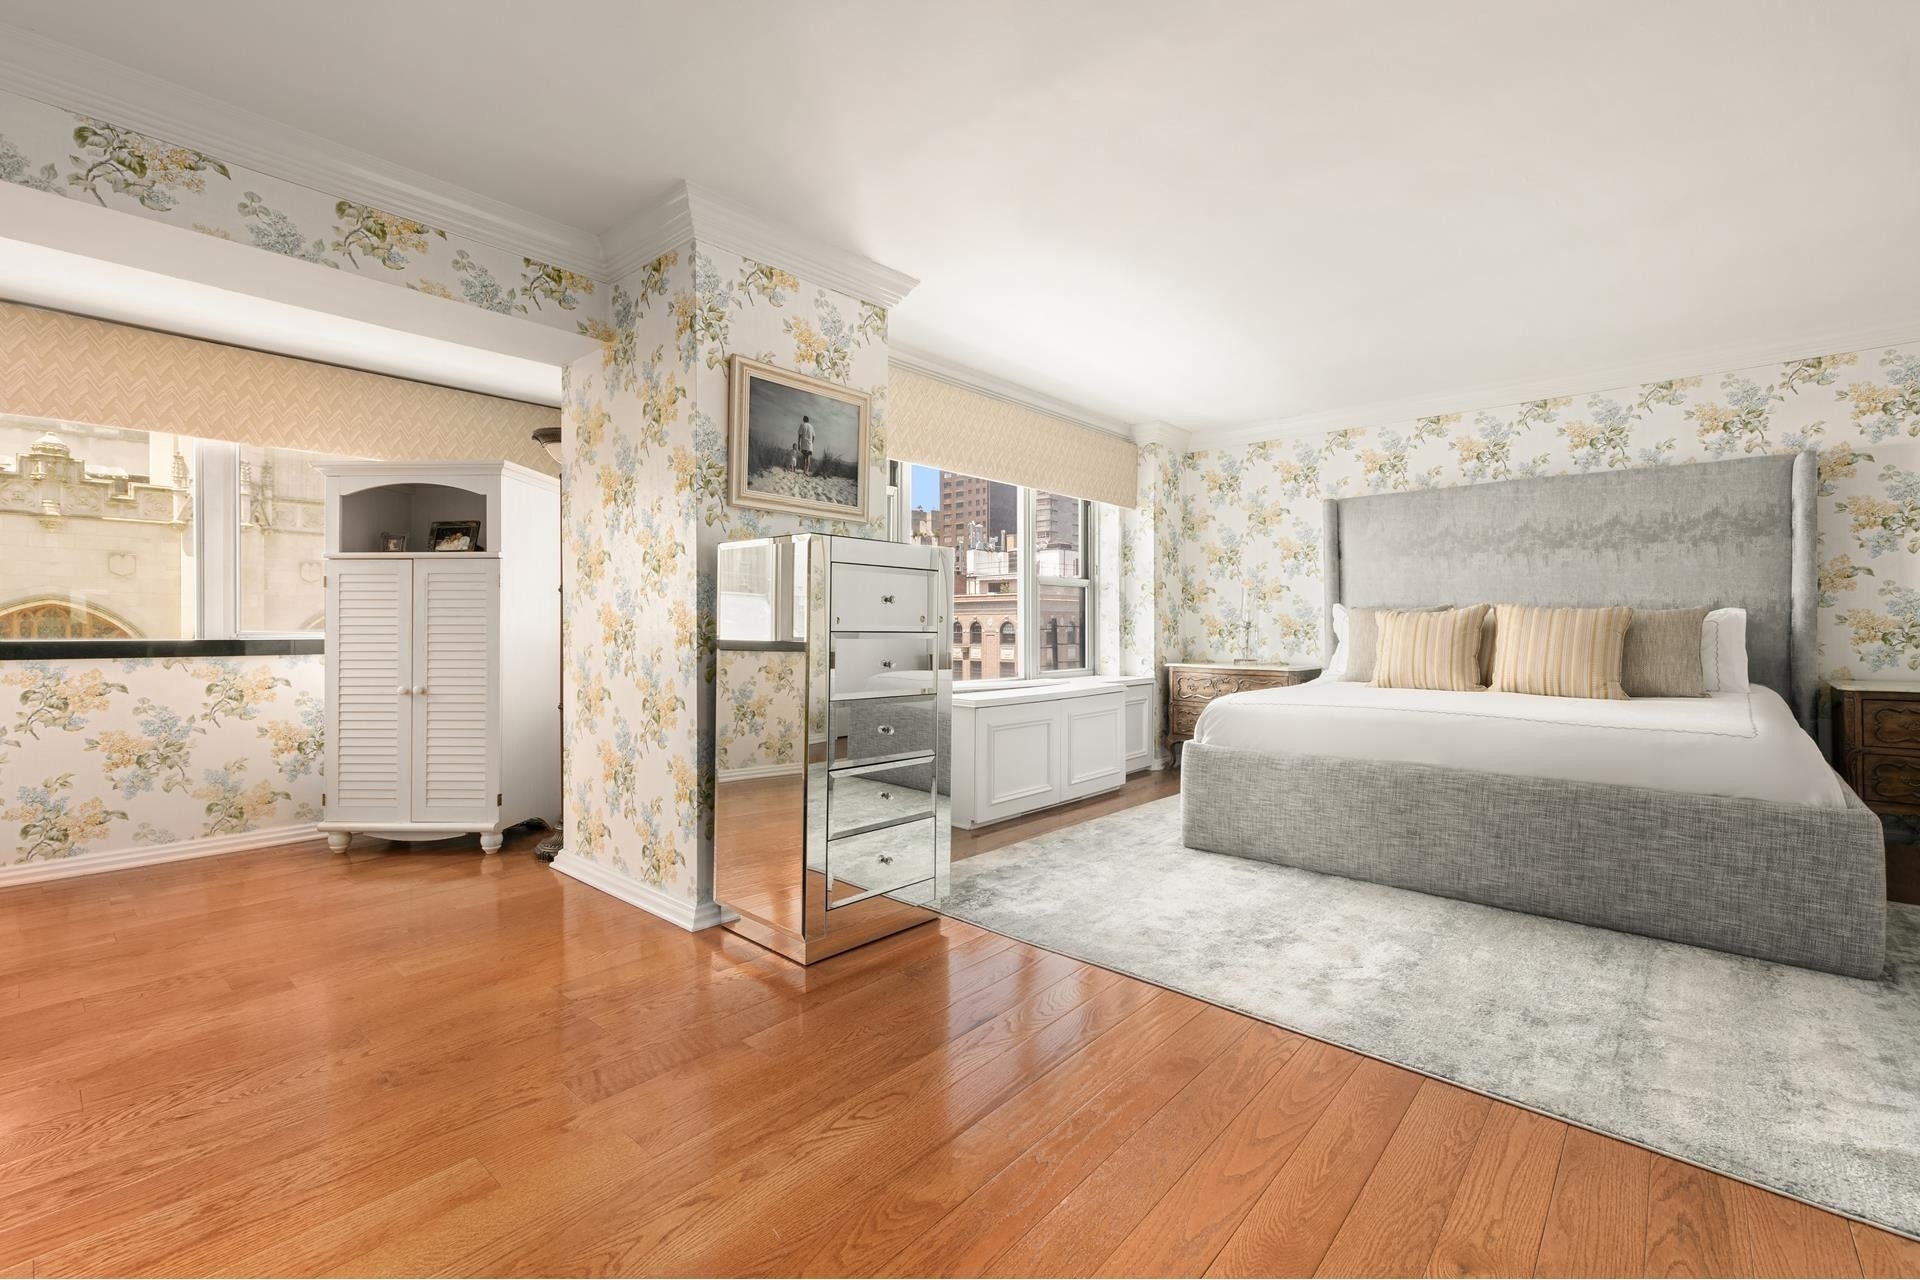 8. Co-op Properties for Sale at Imperial House, 150 E 69TH ST, 12CD Lenox Hill, New York, New York 10021